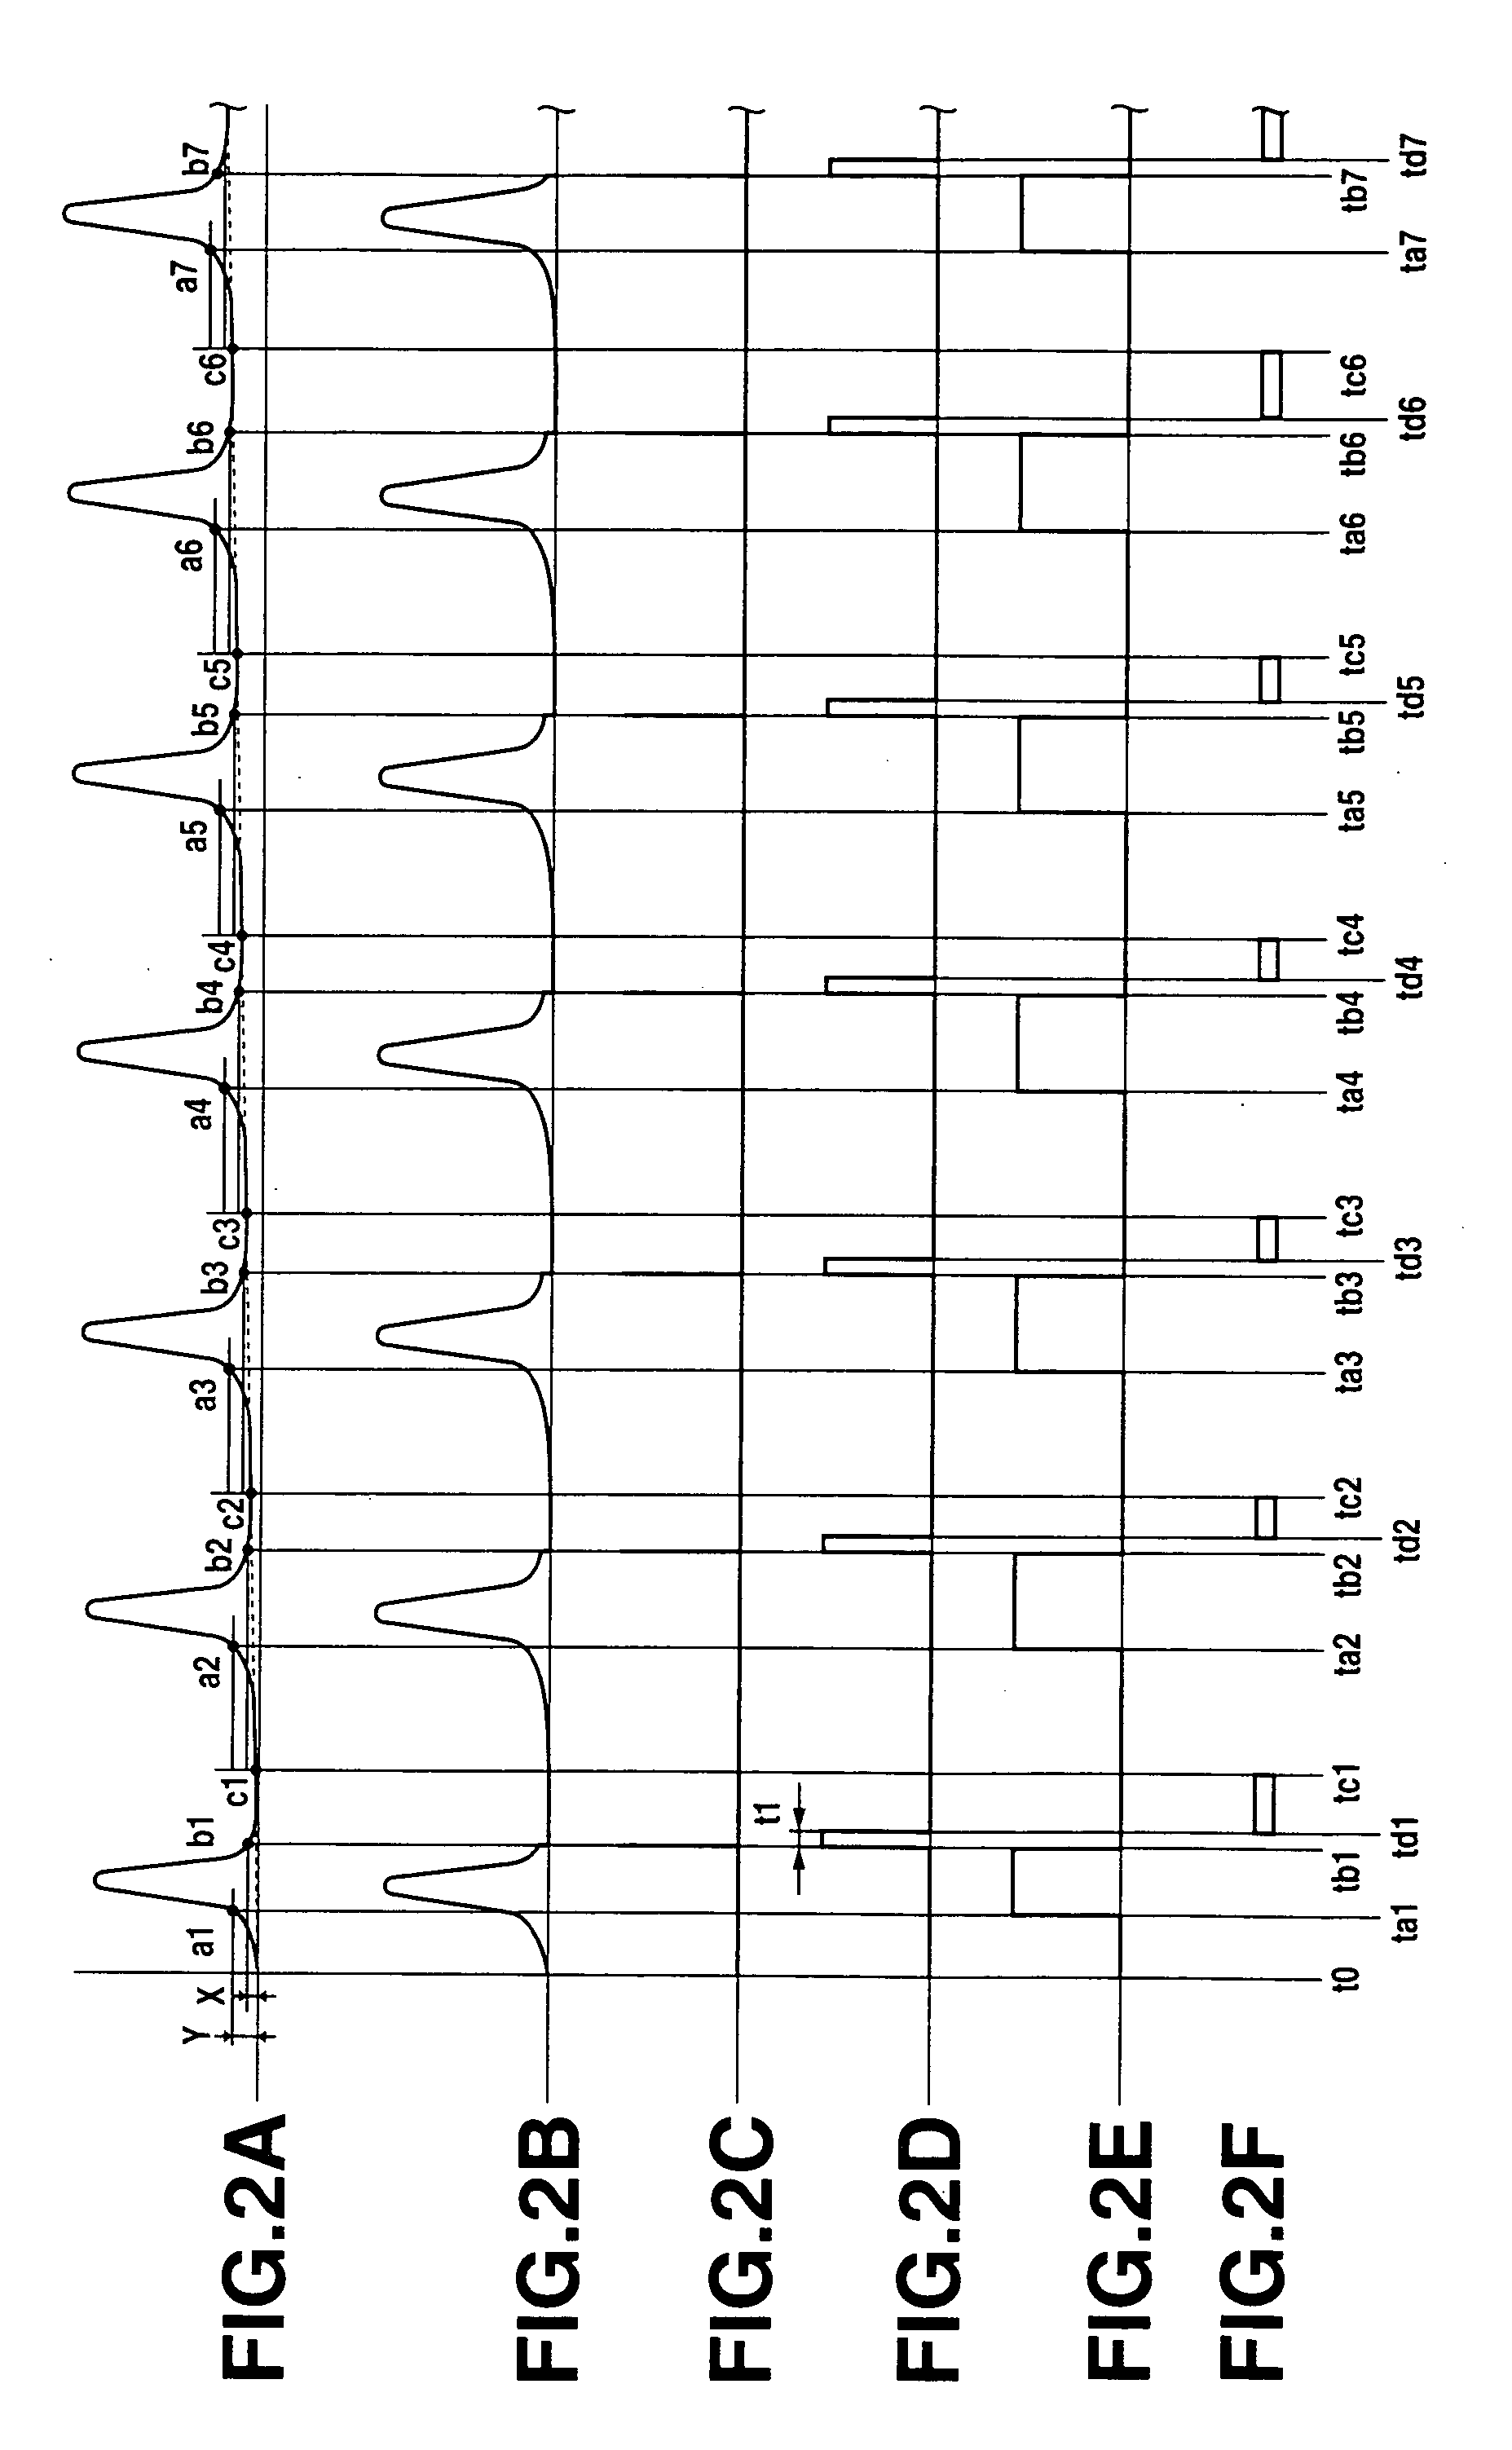 Charge signal converting amplifier